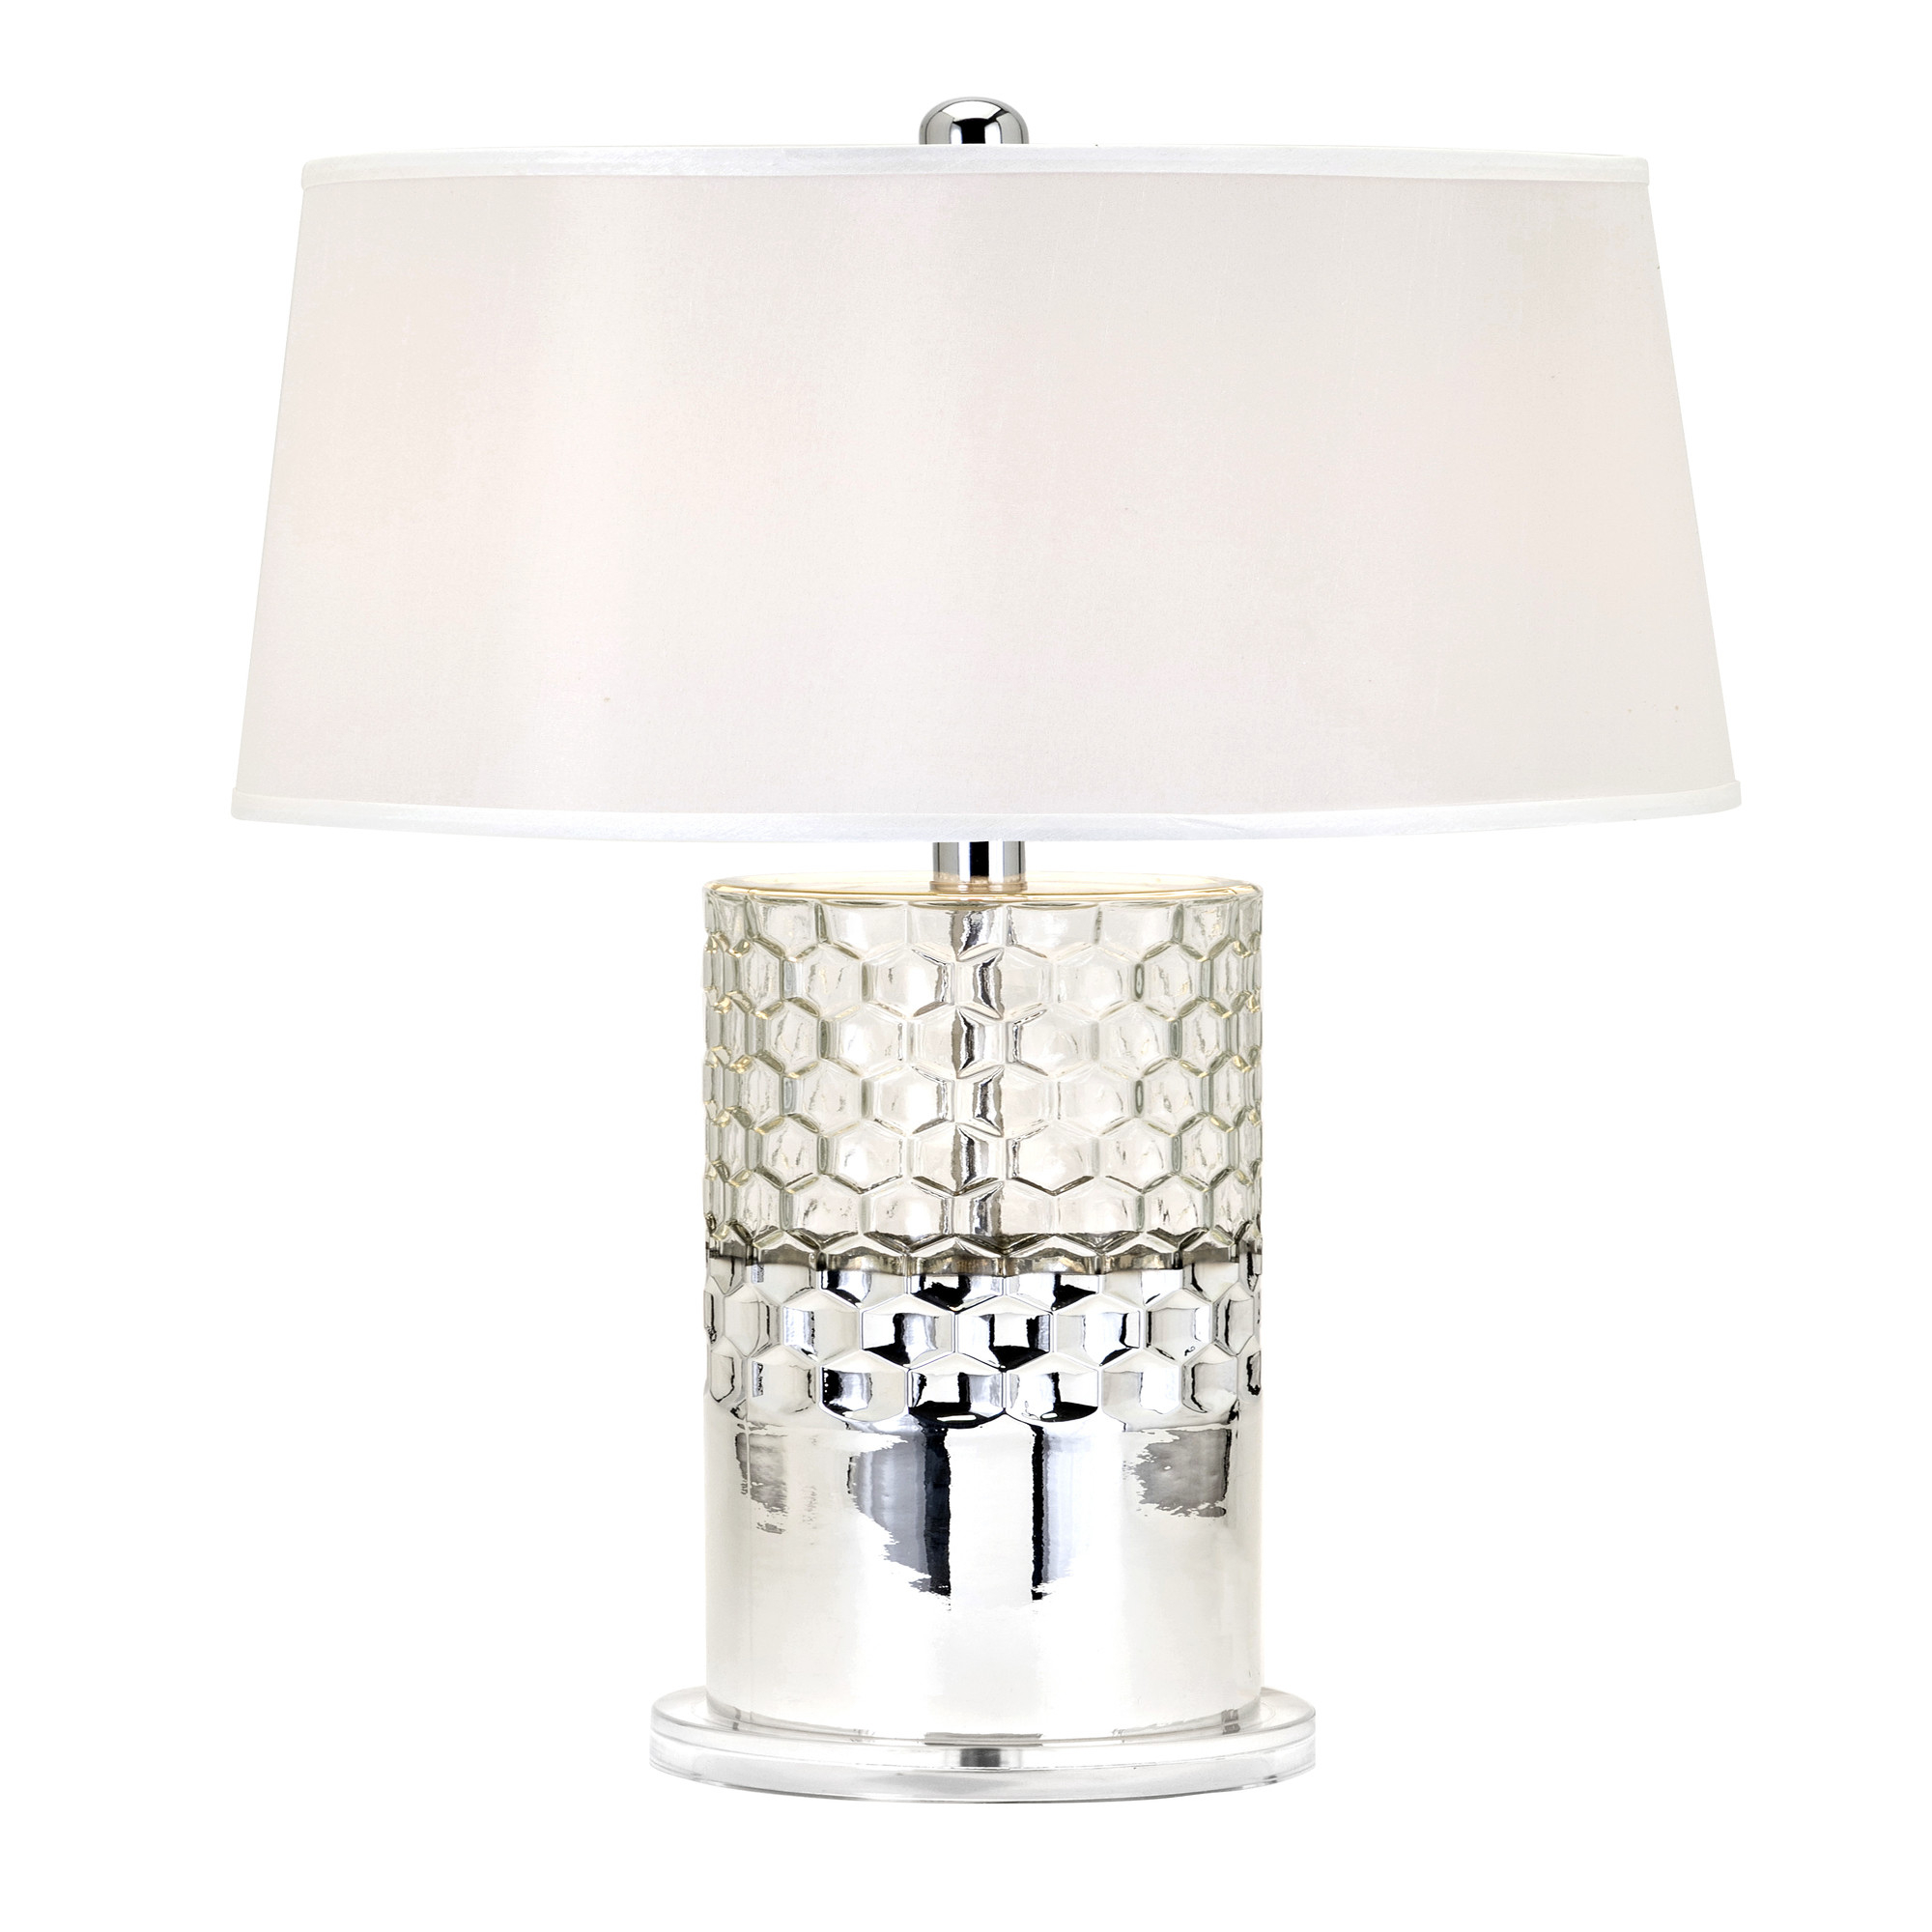 Details About Imax Home 29669 Madison 1 Light Accent And Column Table Lamp Clear in sizing 2000 X 2000